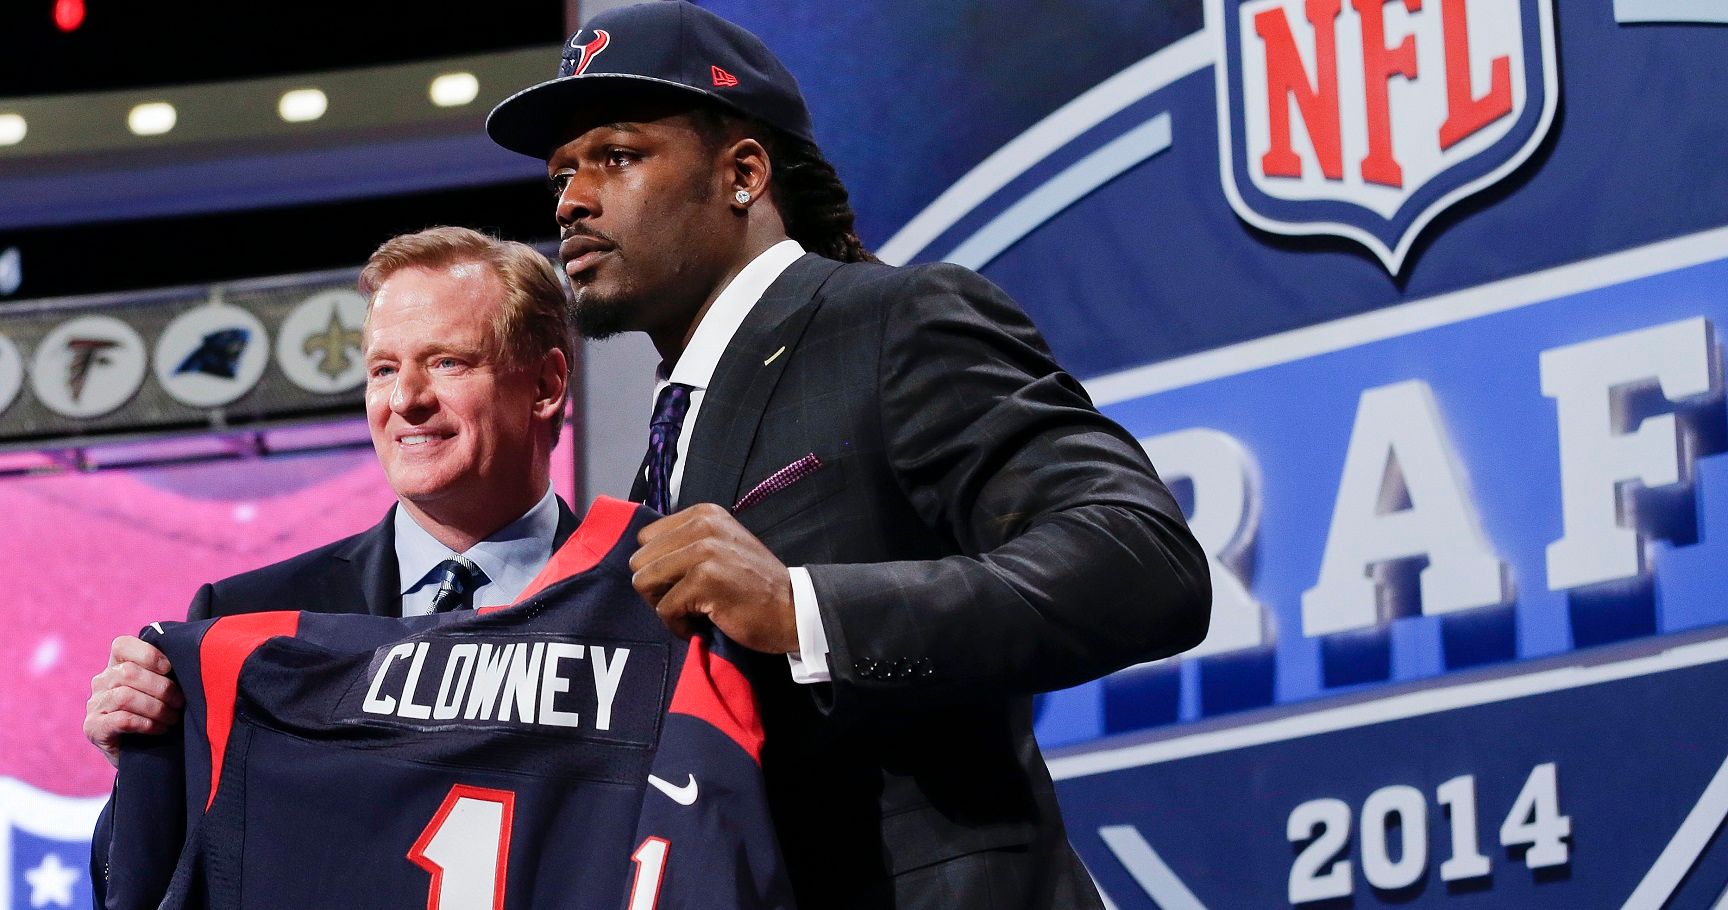 The Top 10 Picks of the 2014 NFL Draft | TheRichest
